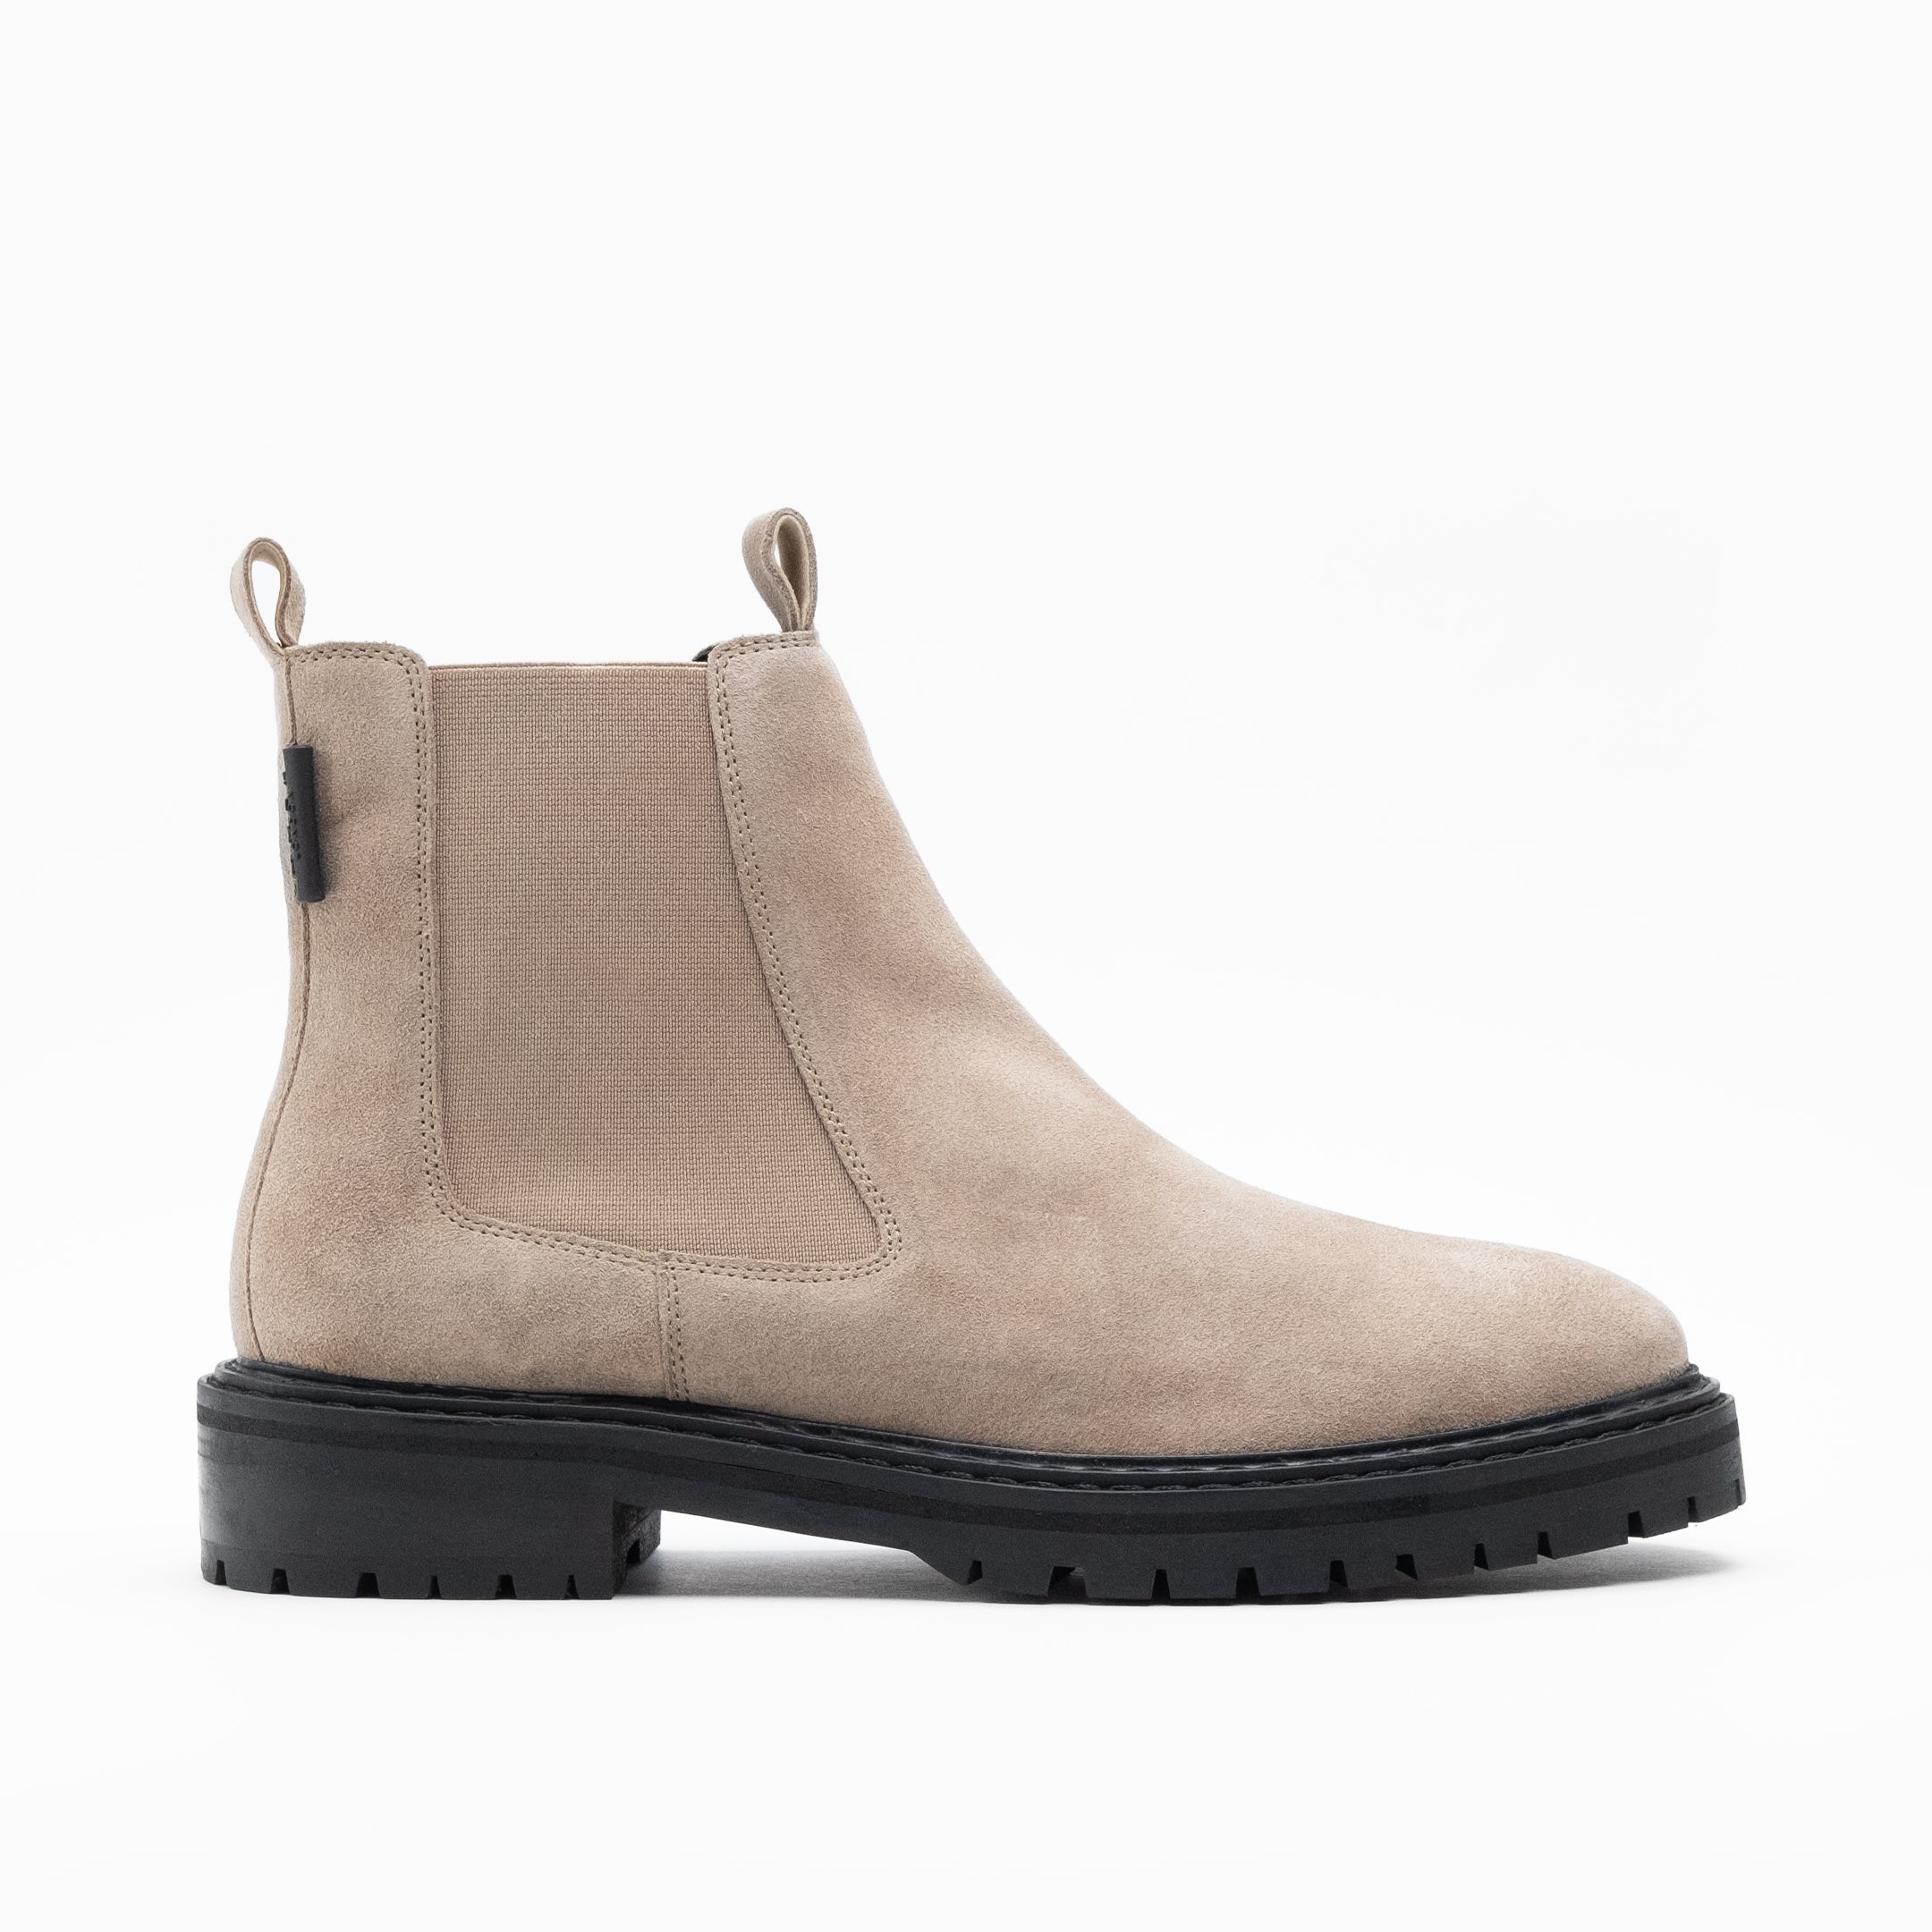 Walk London Mens Marino Chelsea Boot in Taupe Suede